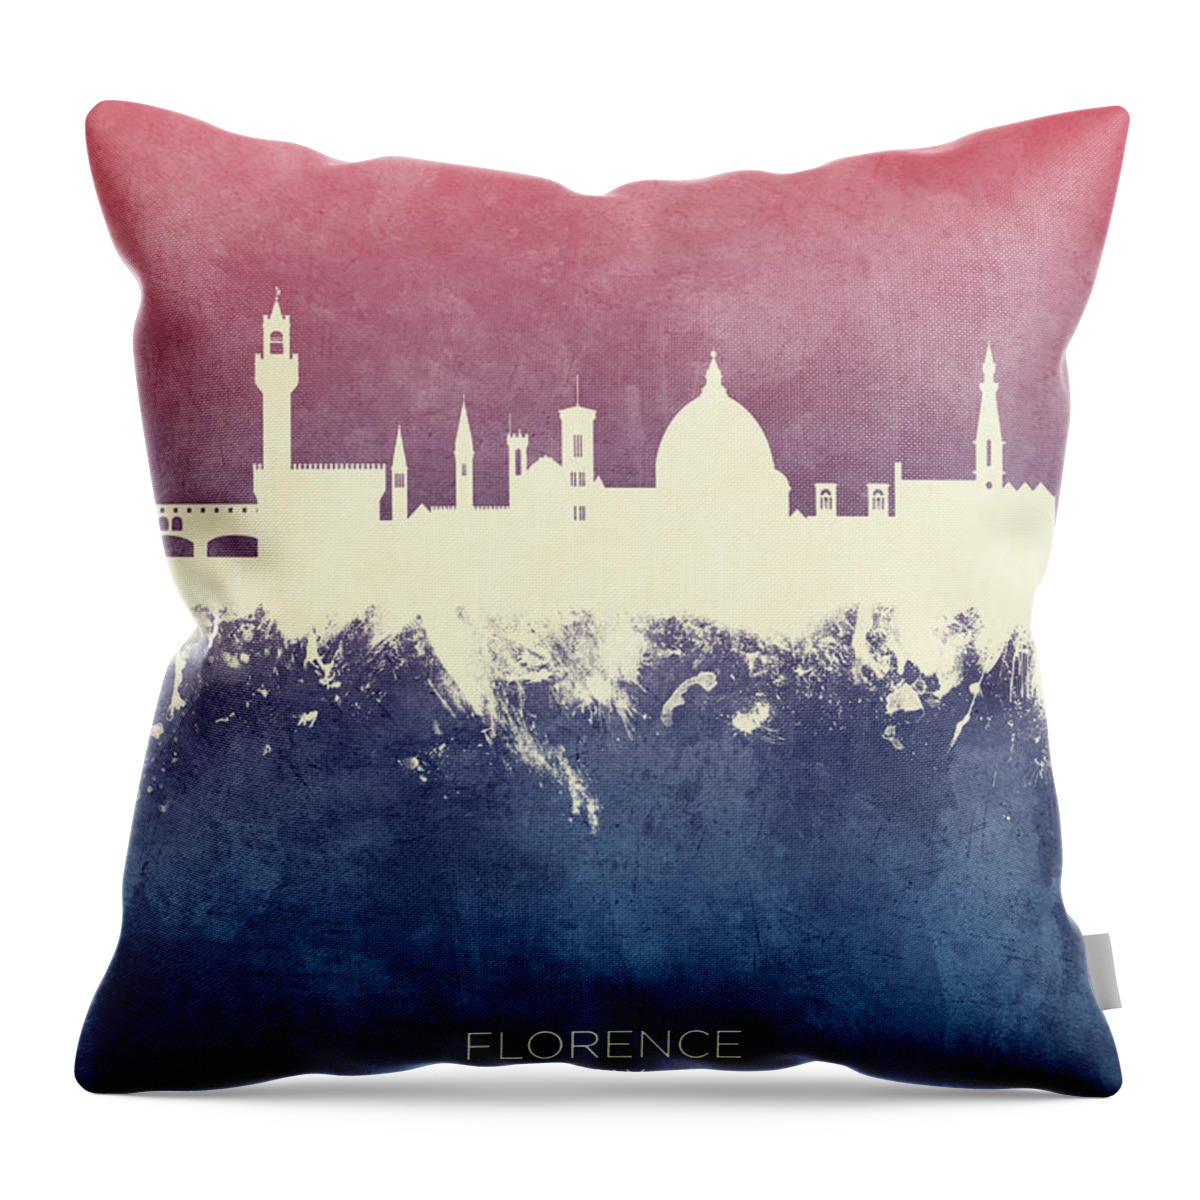 Florence Throw Pillow featuring the digital art Florence Italy Skyline by Michael Tompsett